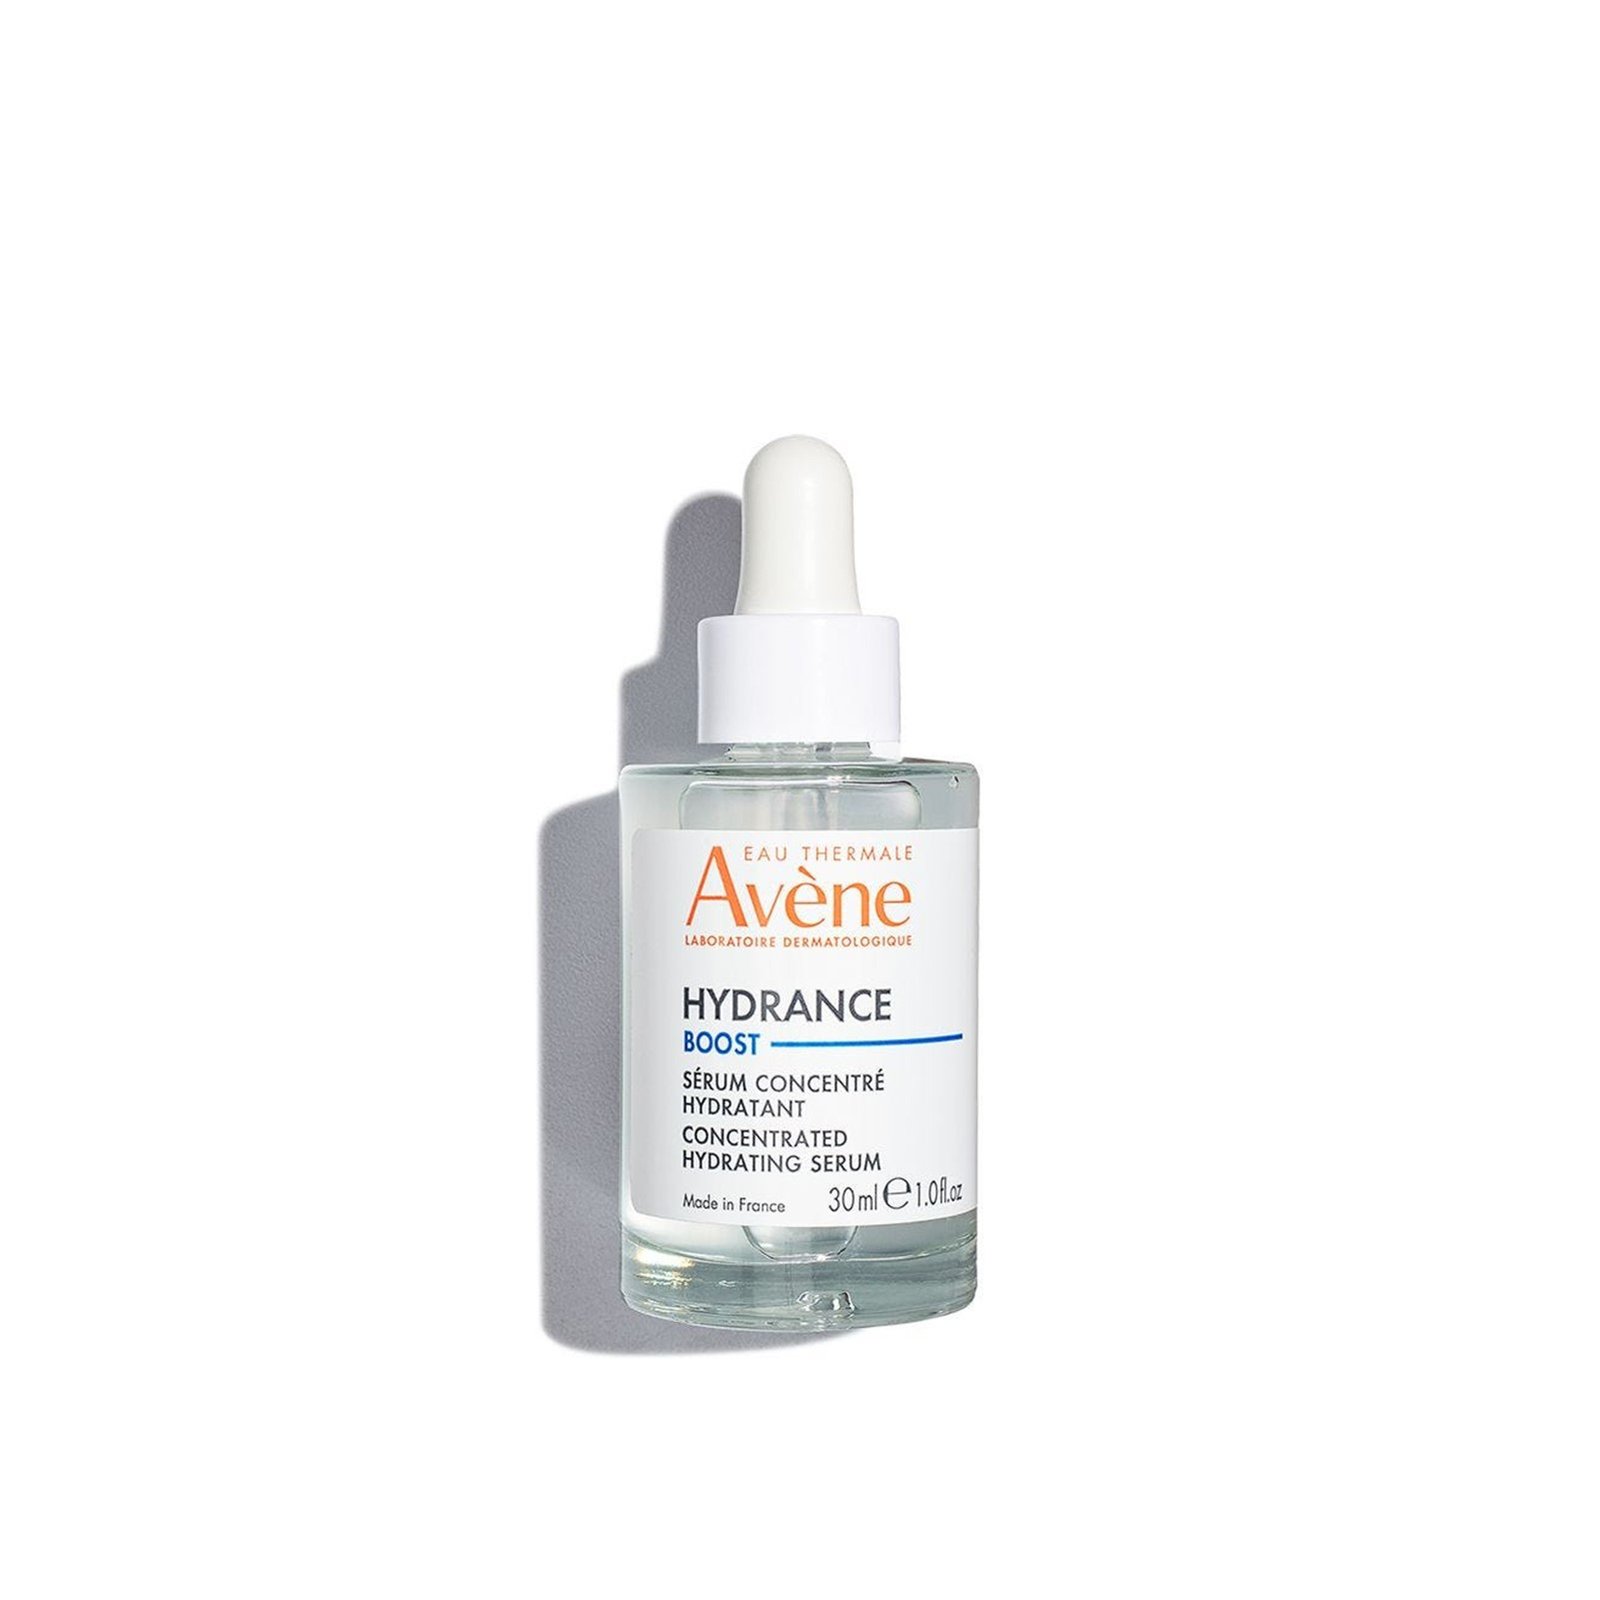 Avène Hydrance Boost Concentrated Hydrating Serum 30ml (1.0floz)